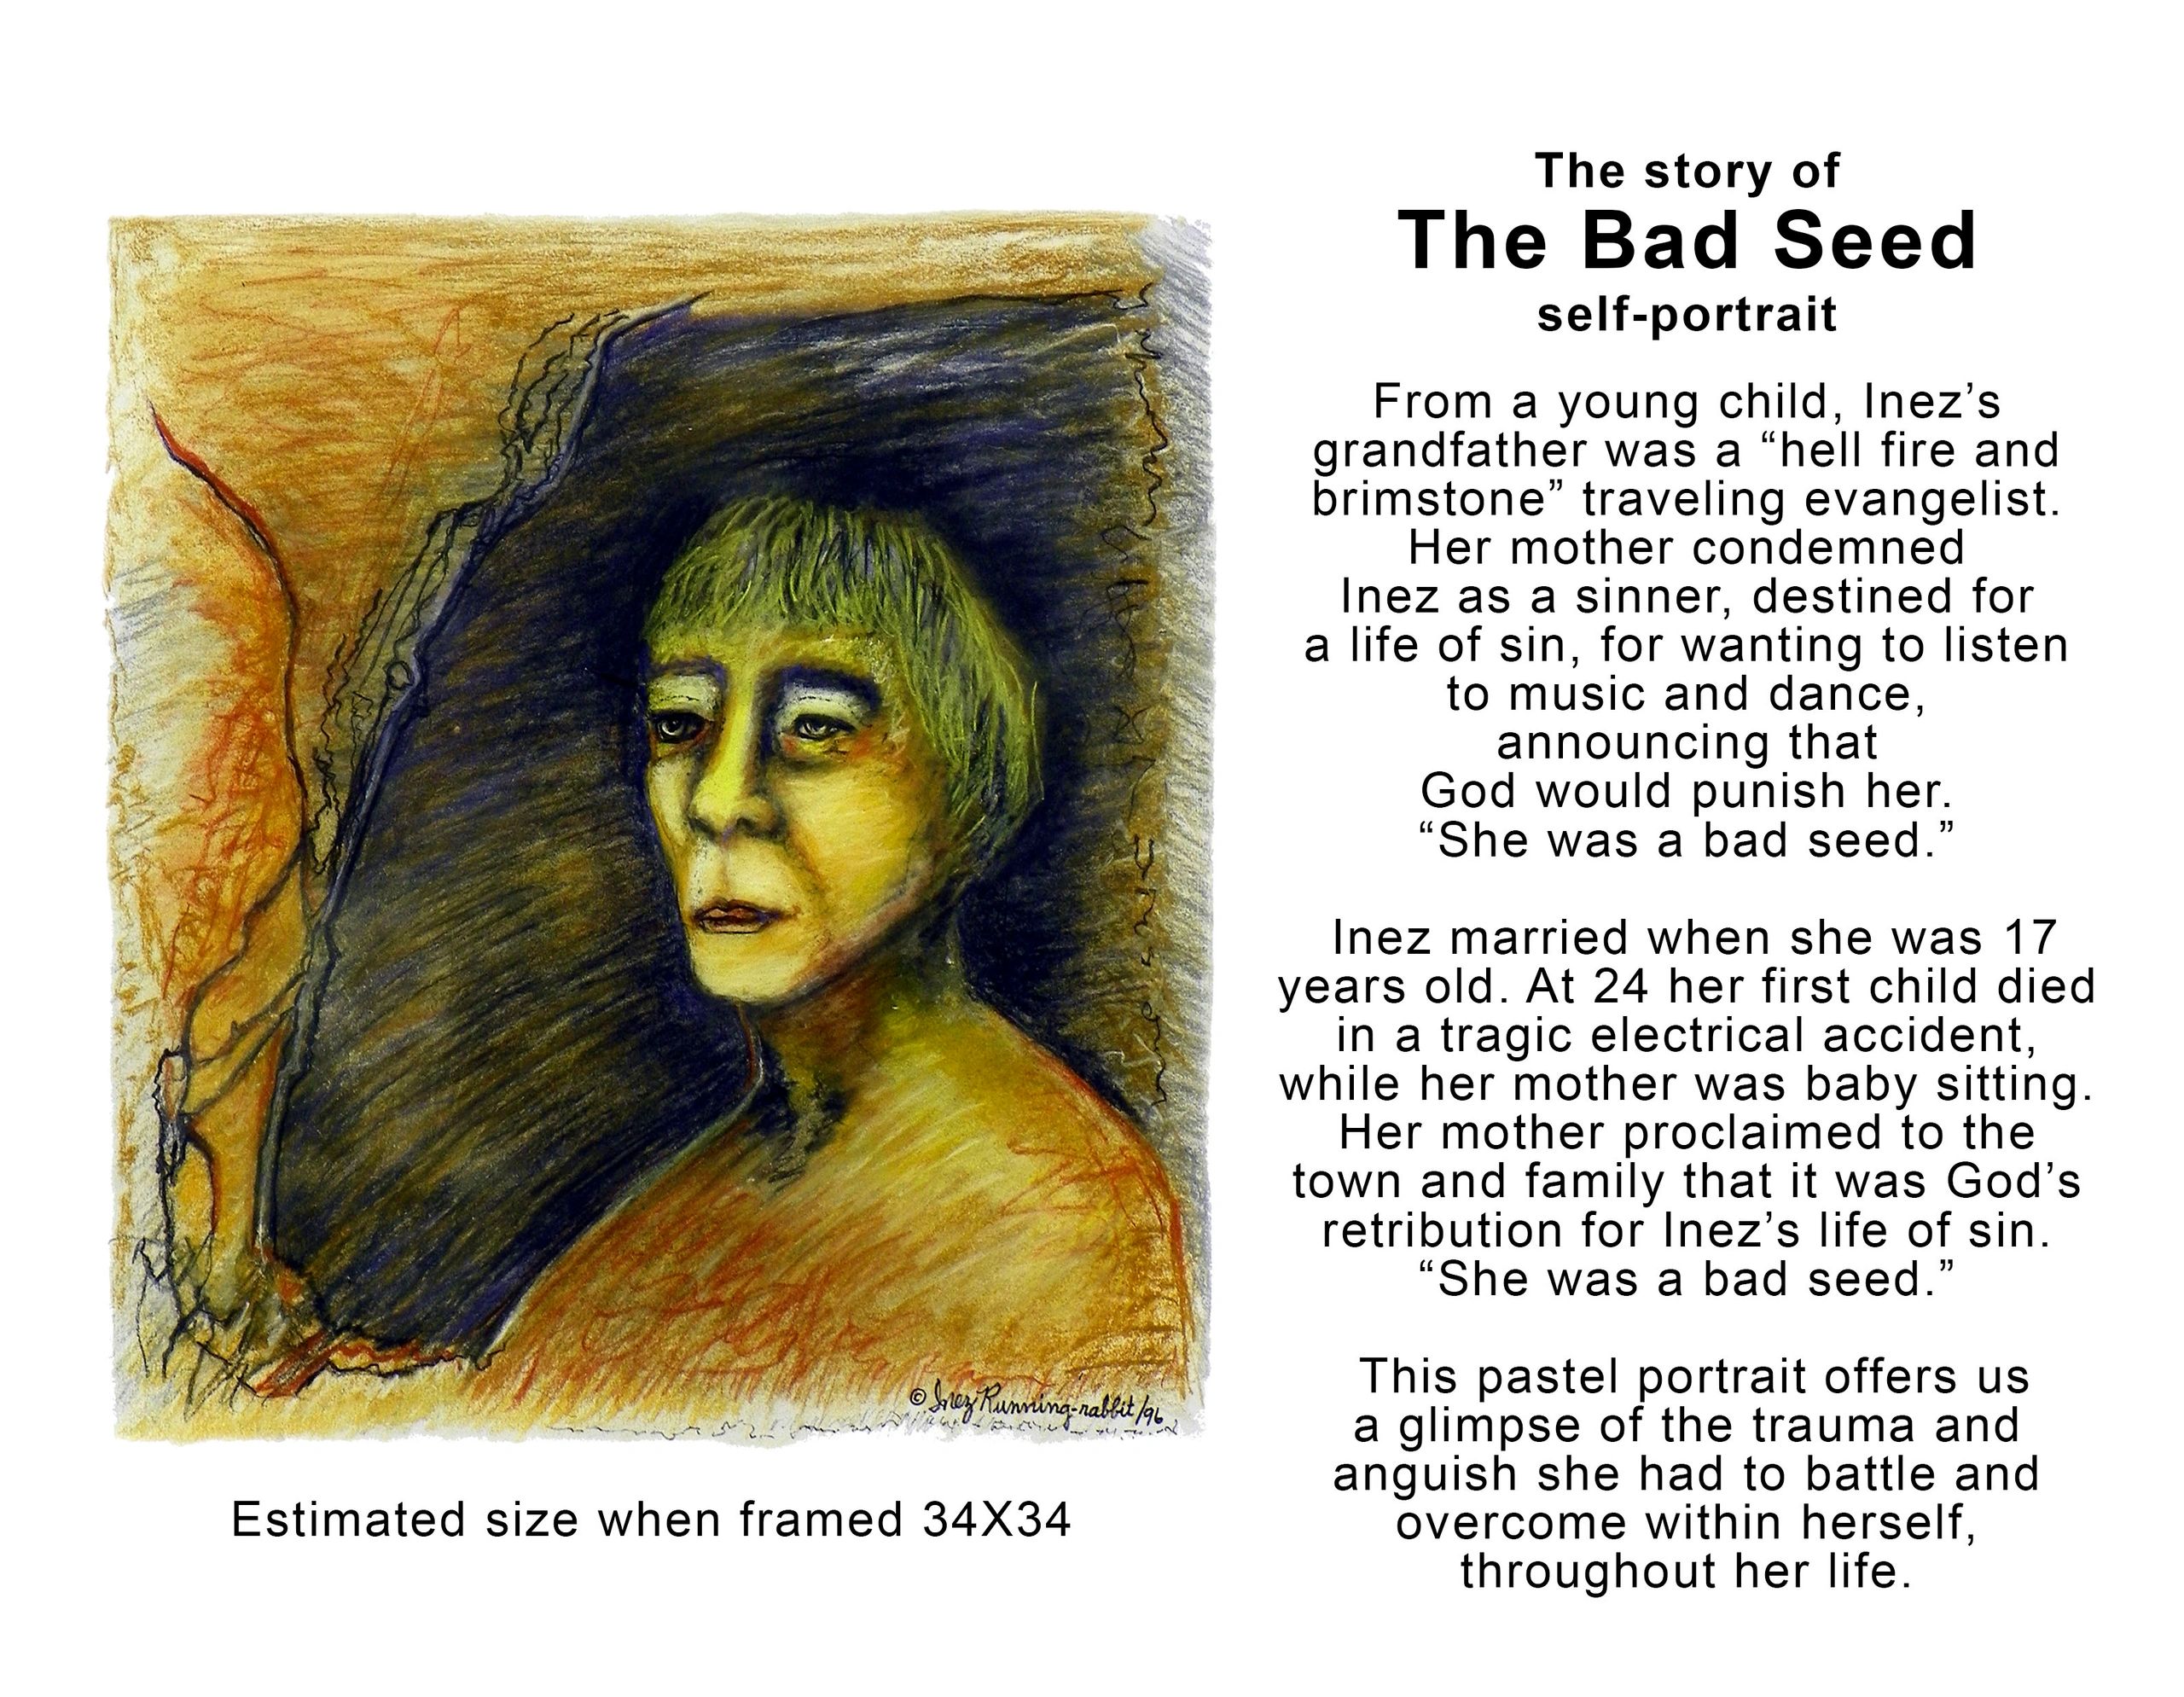 The story of "The Bad Seed " pastel by Inez Running-rabbit. Story told by her son Robin Henson.